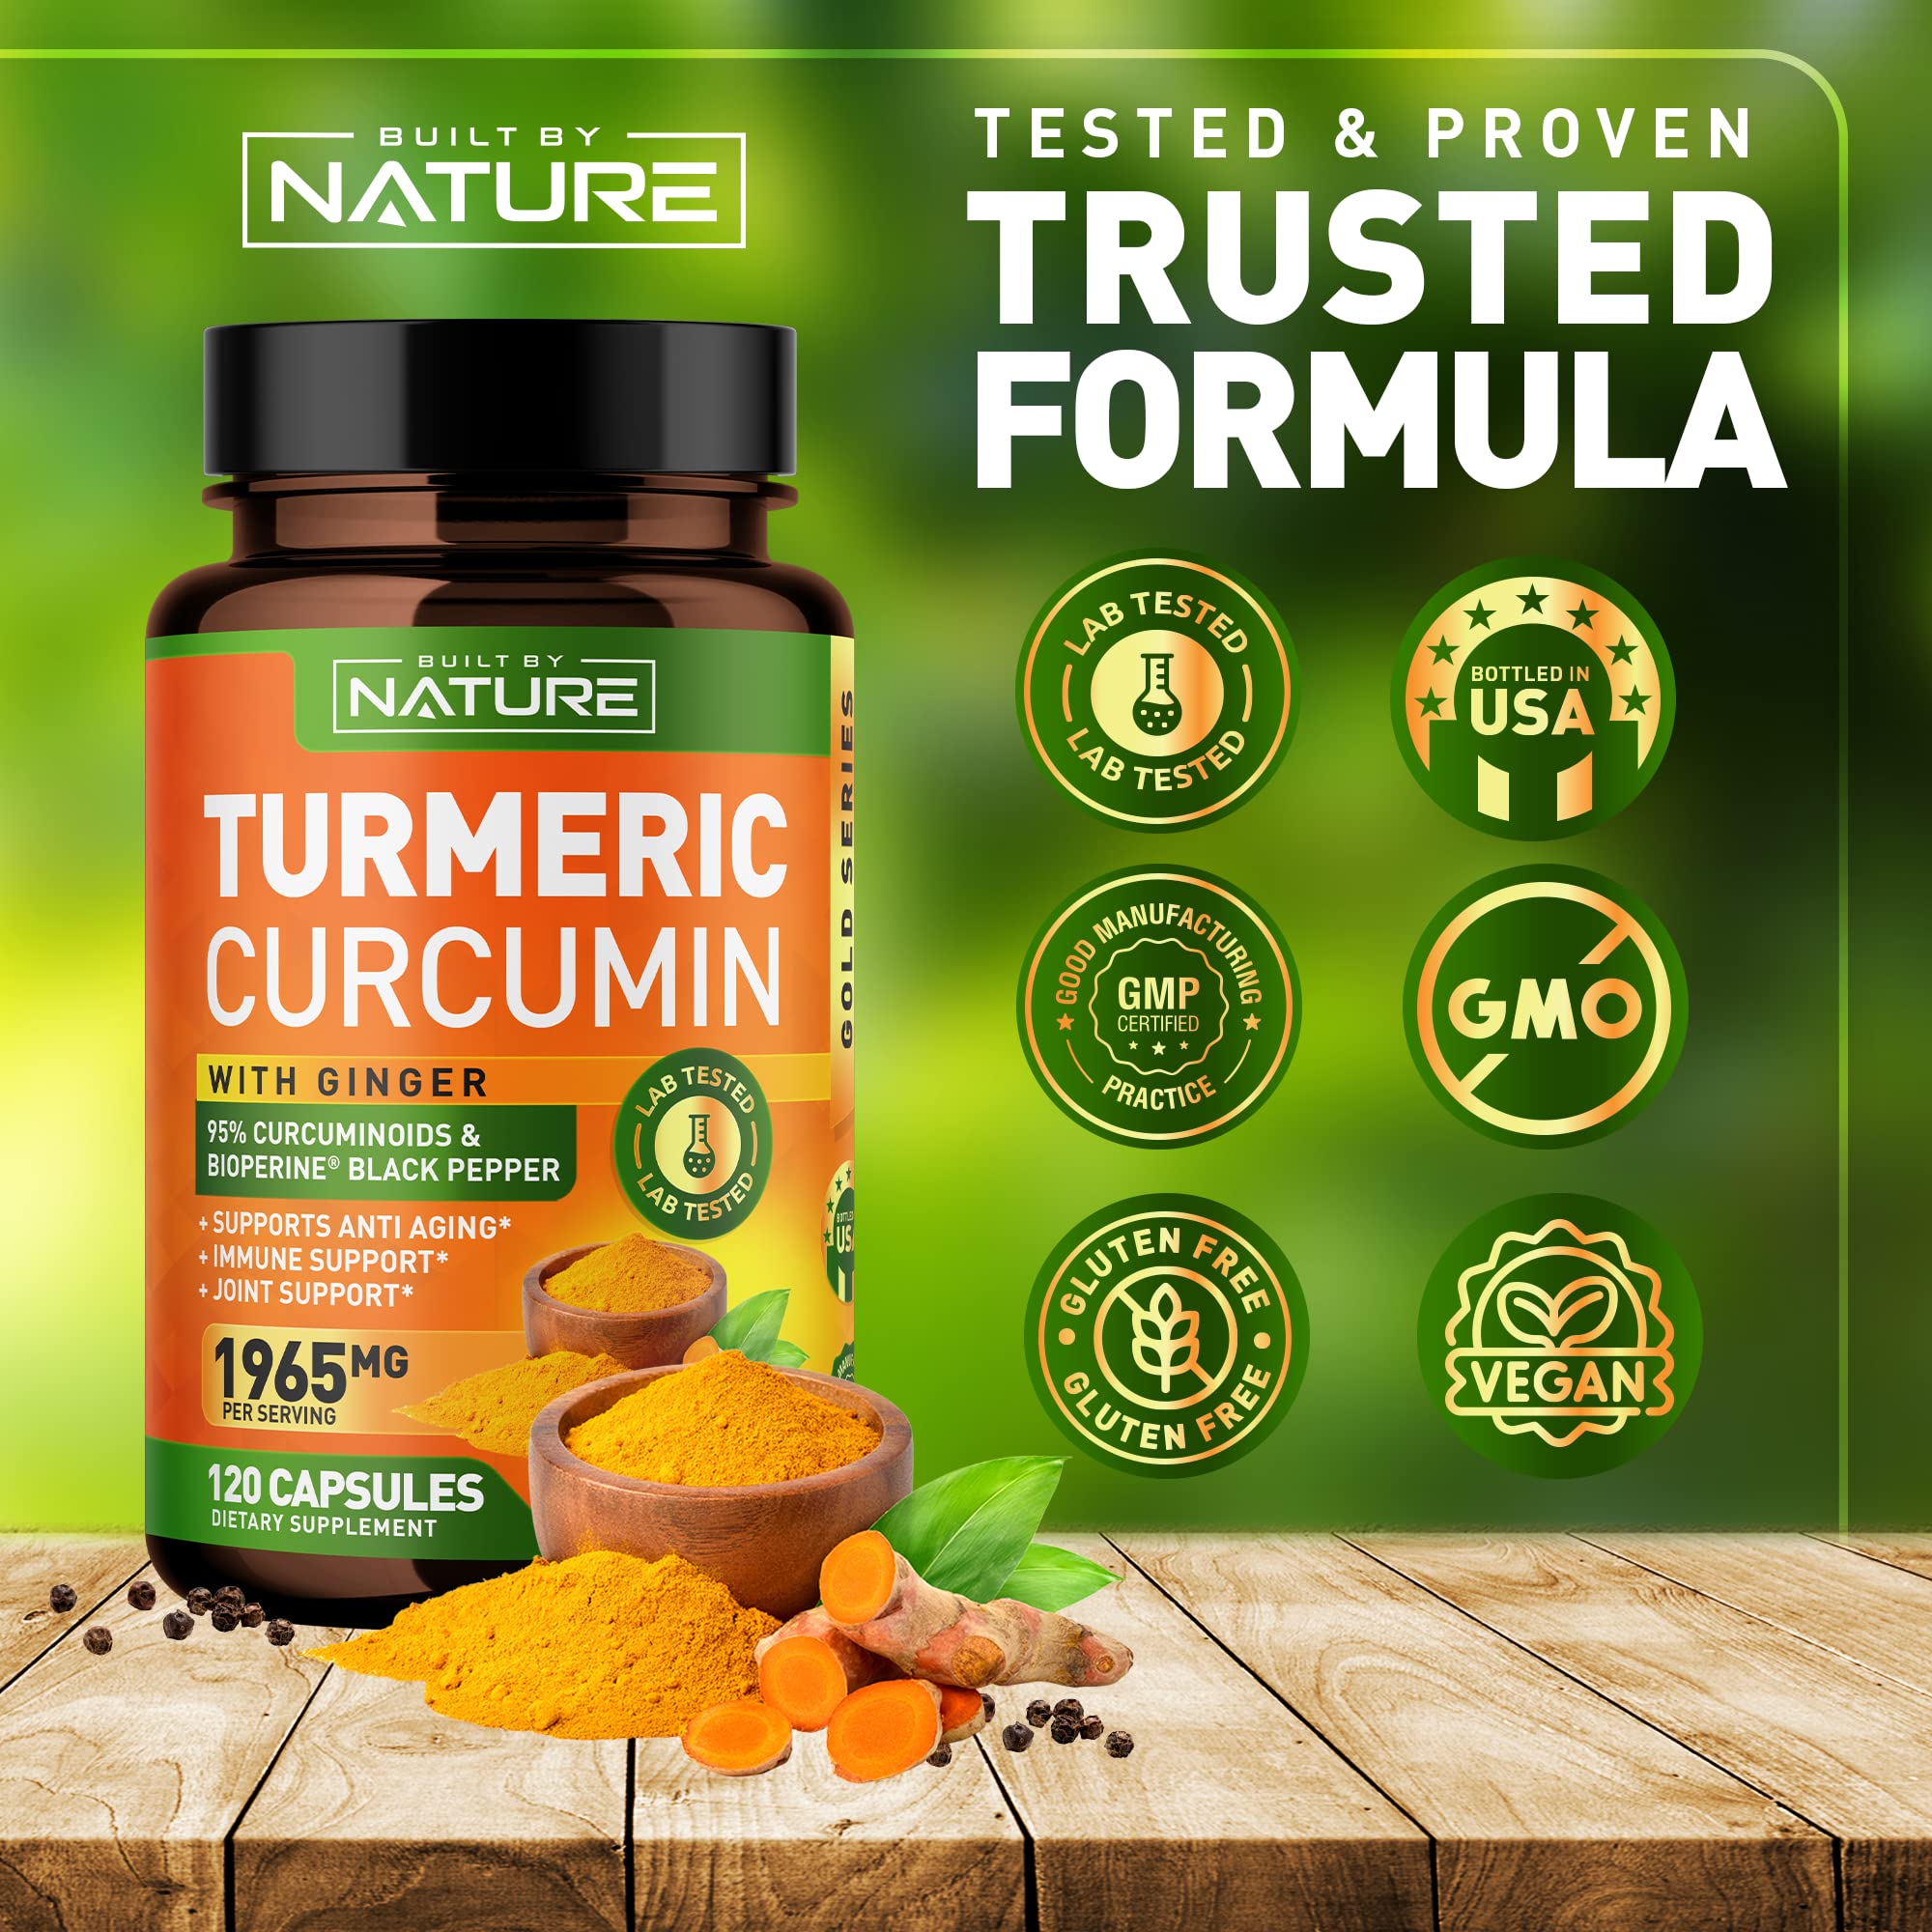 Turmeric Curcumin 1965mg with Ginger & BioPerine Black Pepper Extract - High Absorption 95% Curcuminoids for Joint & Antioxidant Support - Non-GMO, Gluten-Free, Vegan - 120 Herbal Supplement Capsules